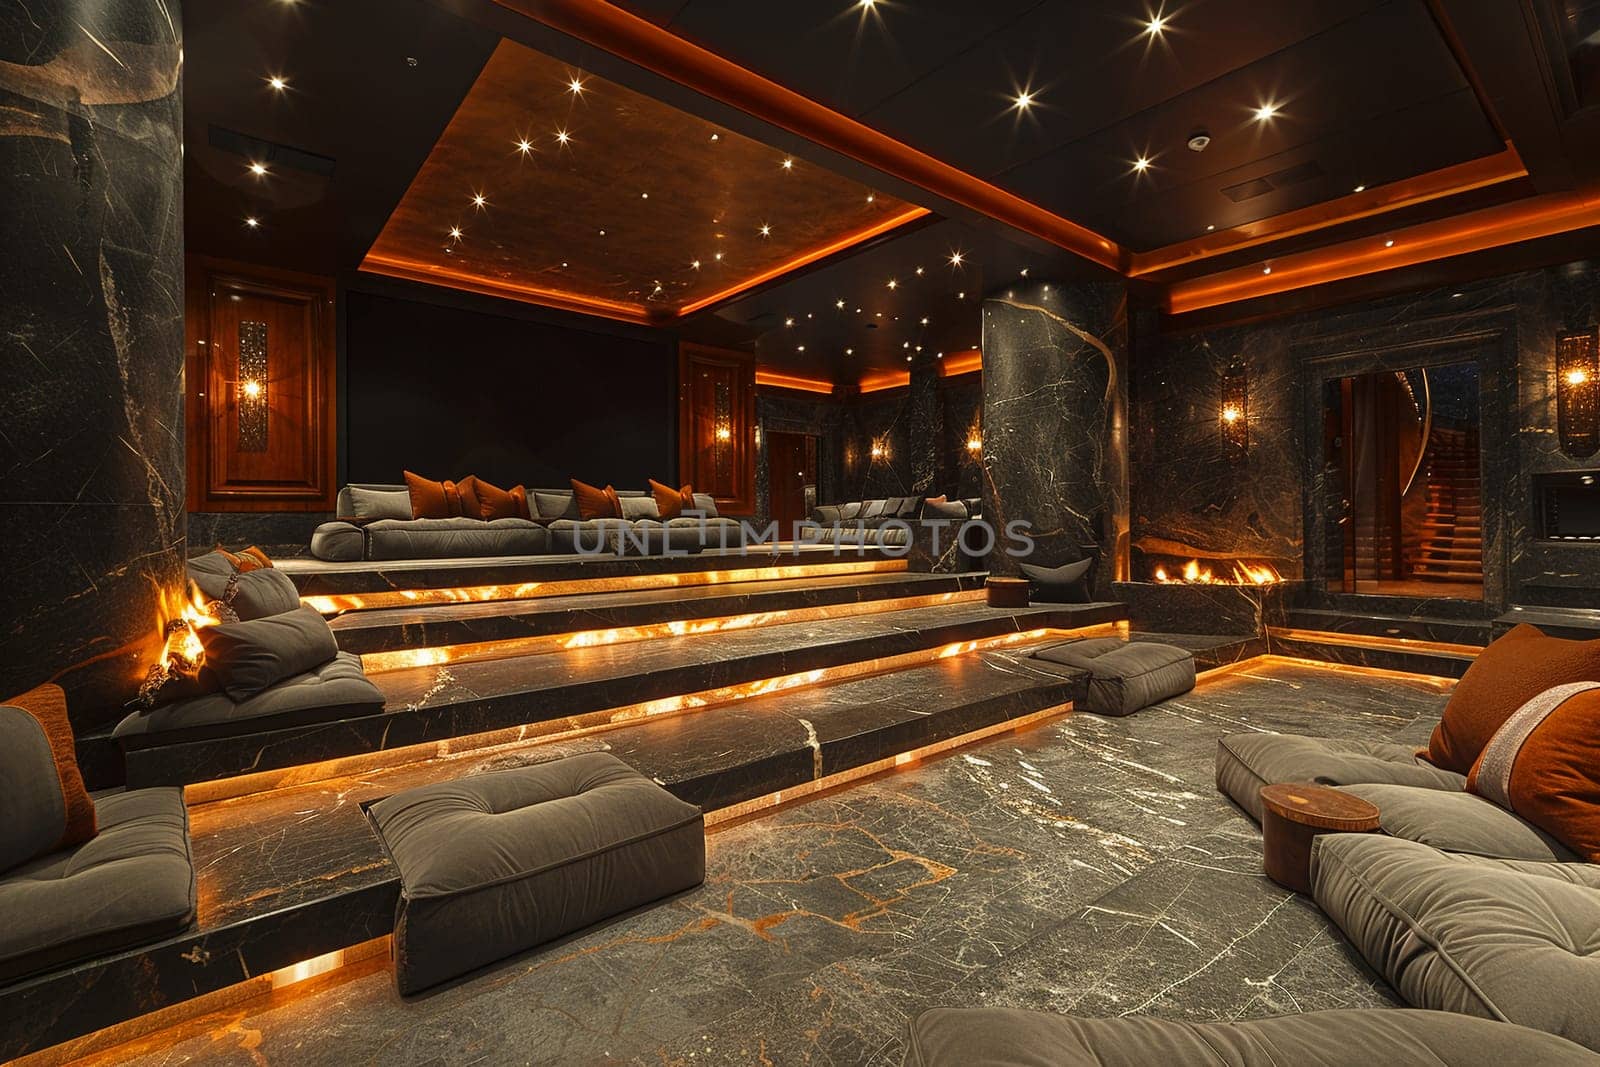 Luxurious home theater with plush seating and state-of-the-art sound system